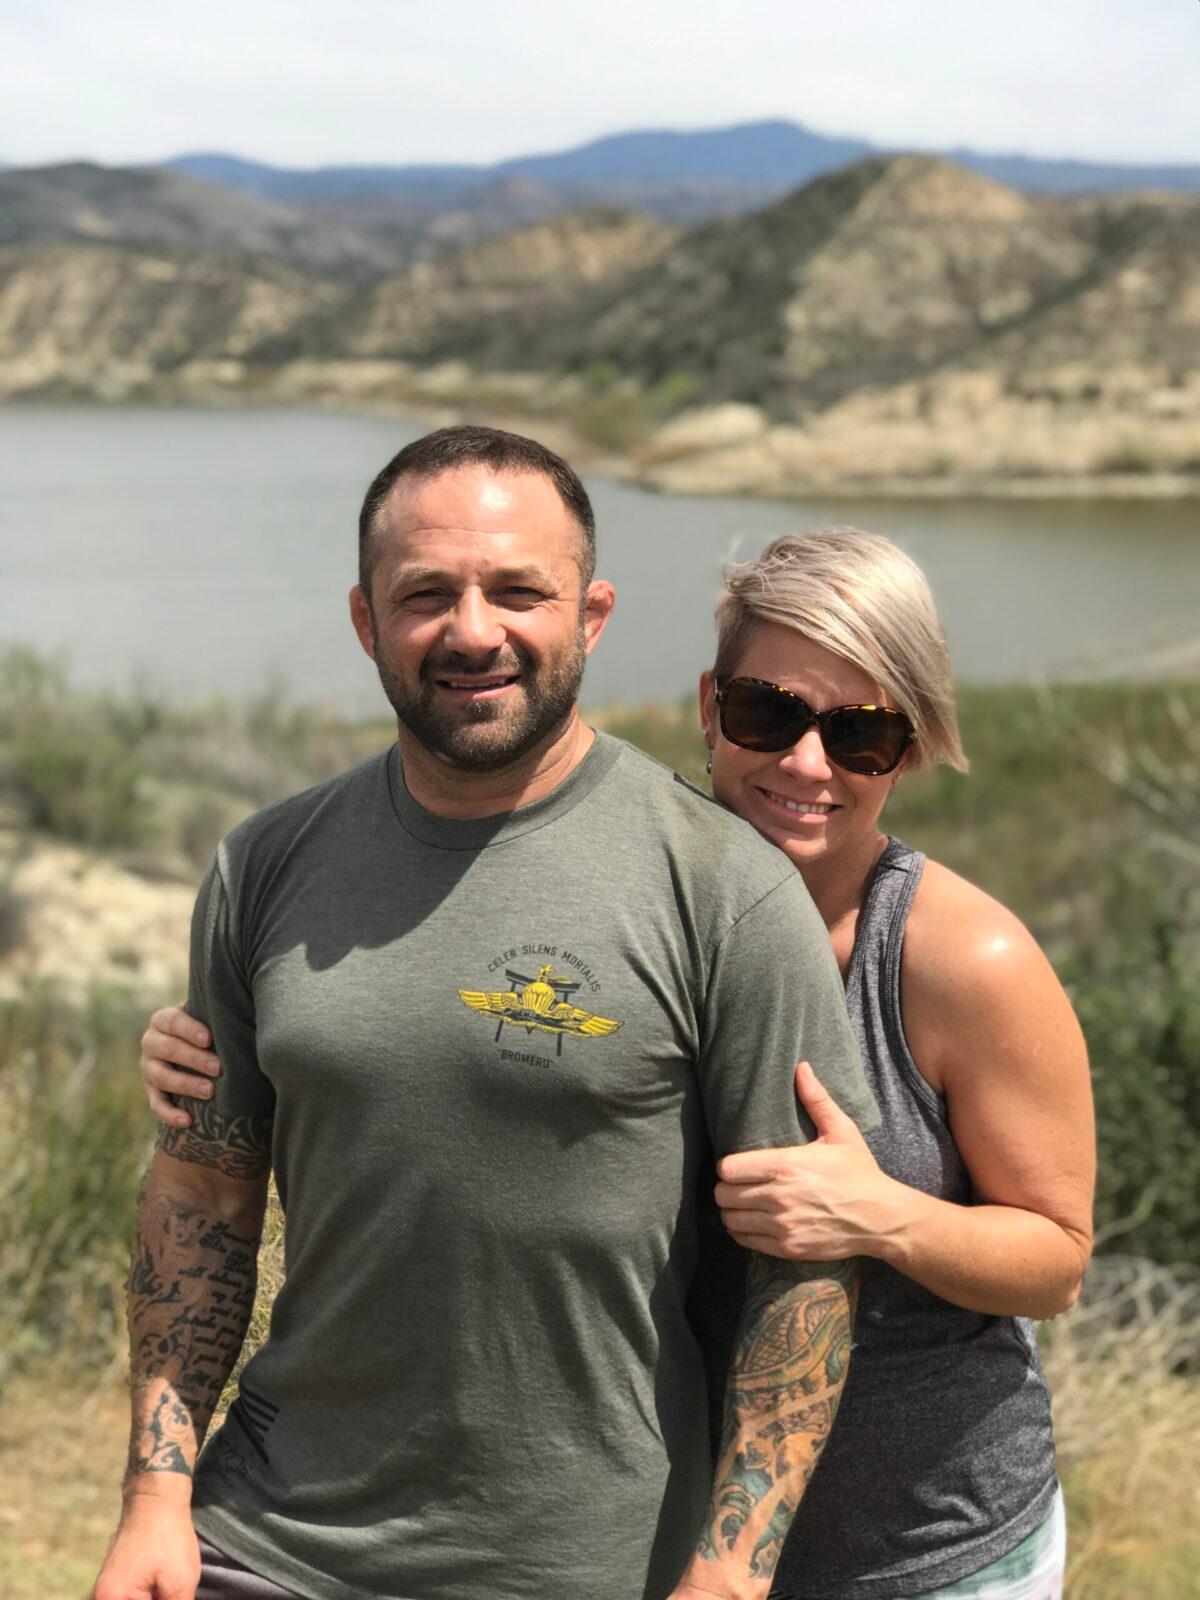 Chad Robichaux successfully fought his inner demons with the support of his wife, Kathy. Here, the couple is photographed in Temecula, Calif. (Courtesy of Chad Robichaux)